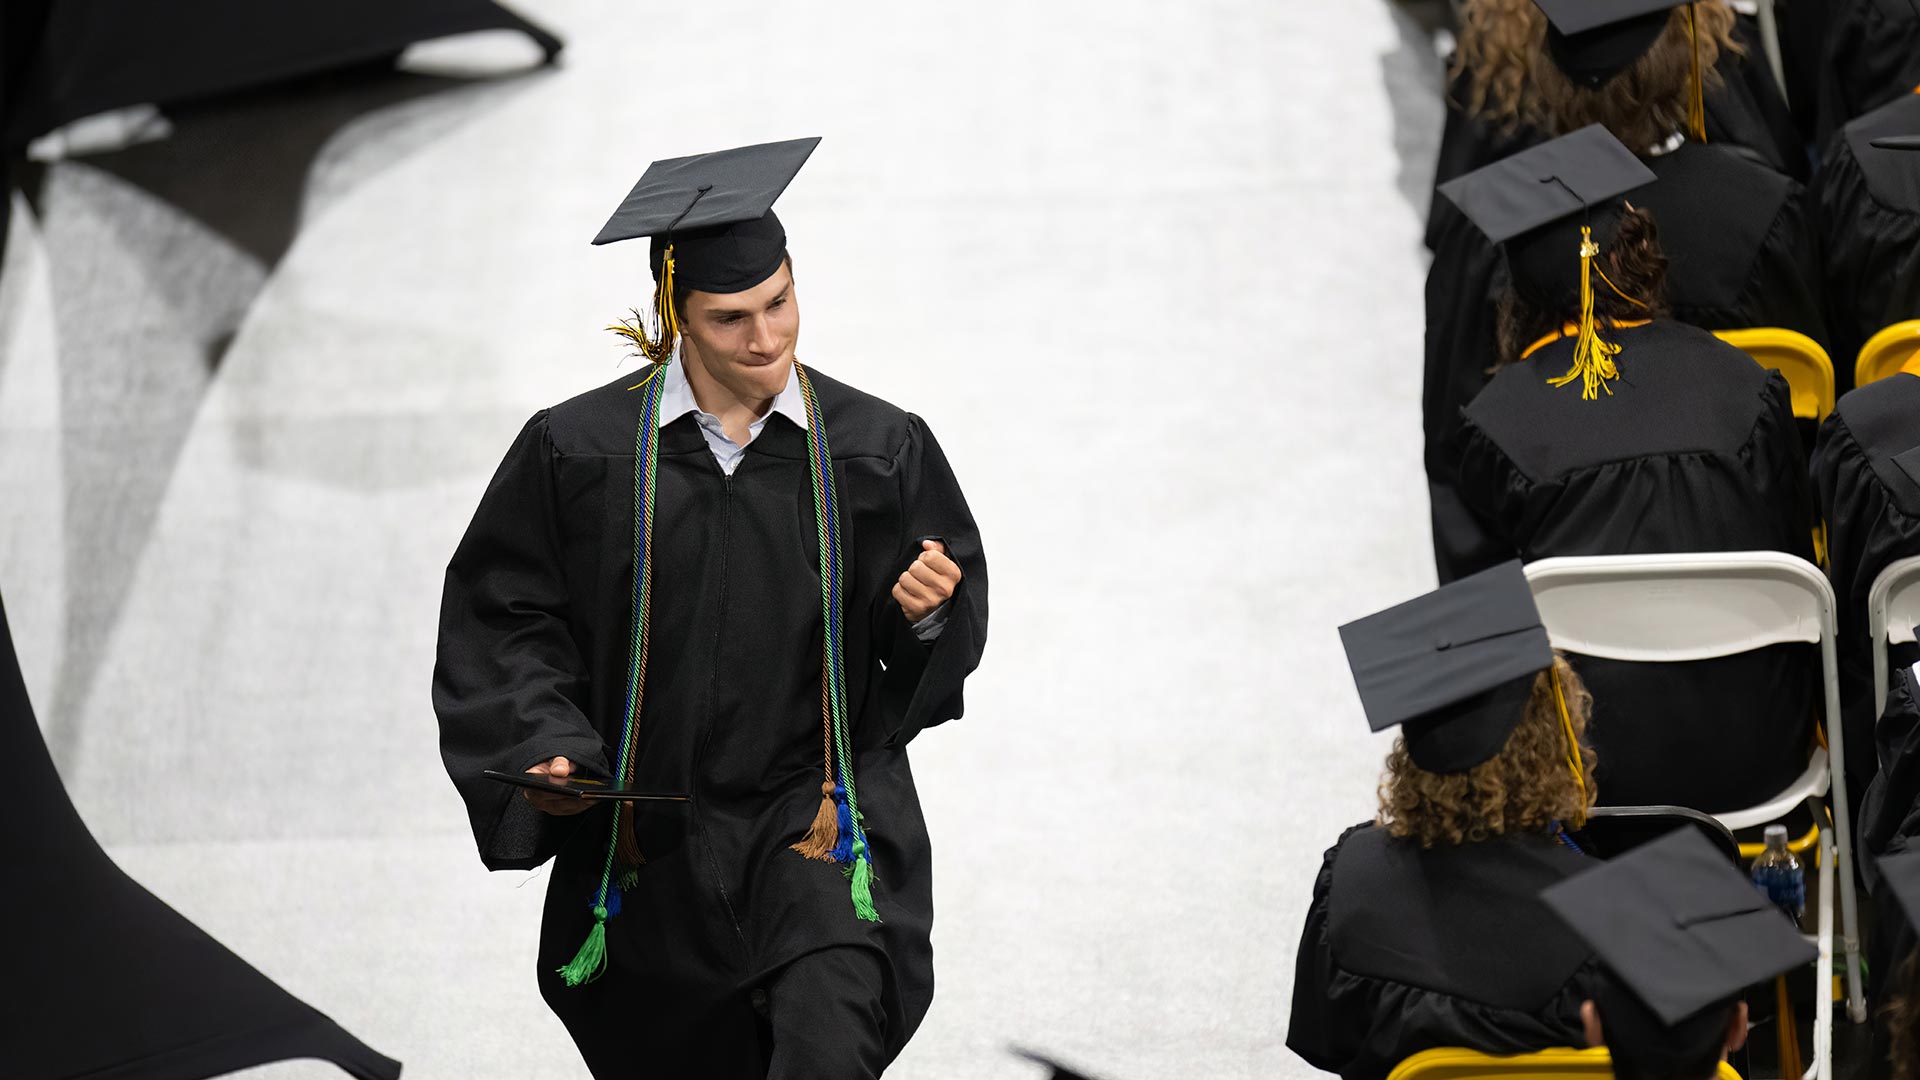 Commencement for the Colorado College Class of 2023 was held Sunday, May 28, 2023 in Ed Robson Arena on the CC campus. Photo by Mark Reis